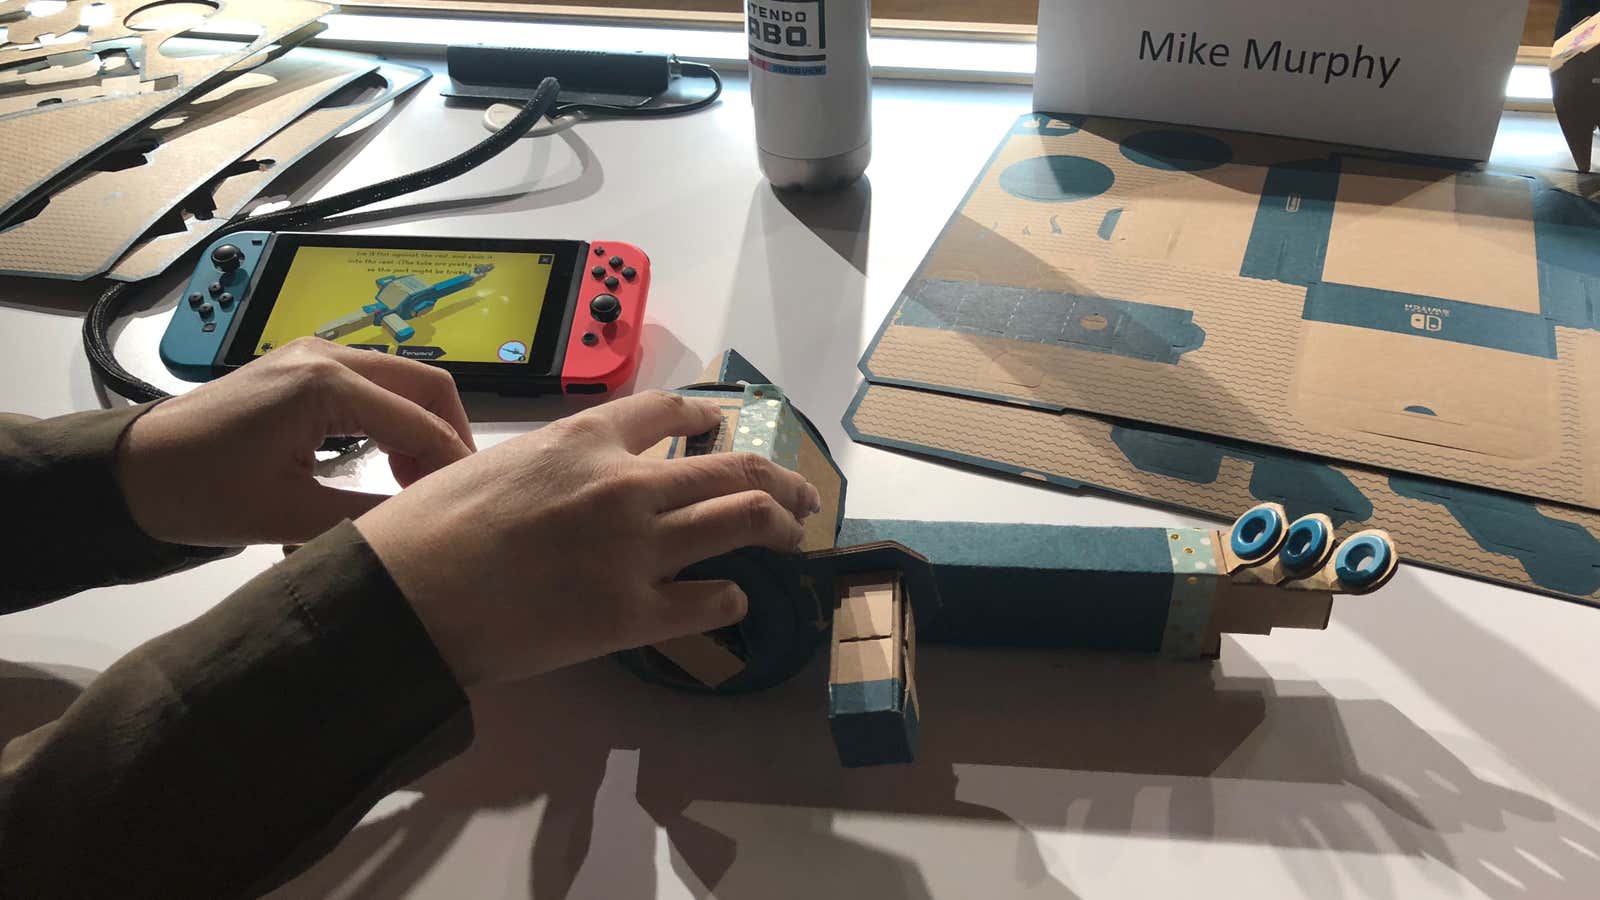 Nintendo Labo preview: Playing with cardboard is surprisingly fun